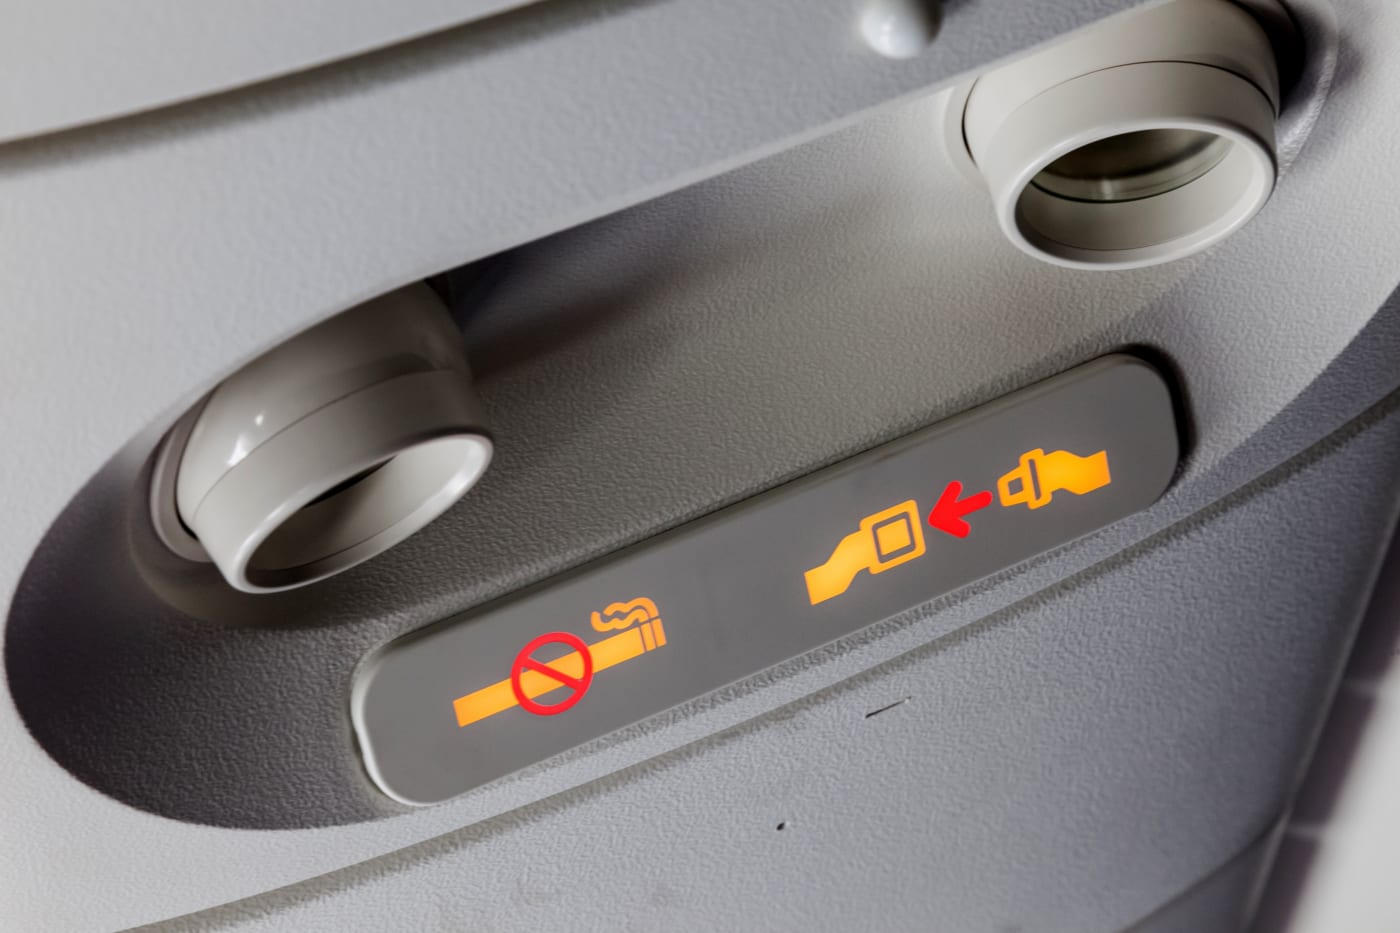 United Airlines grounds Airbus A321neo fleet over antiquated no smoking sign law